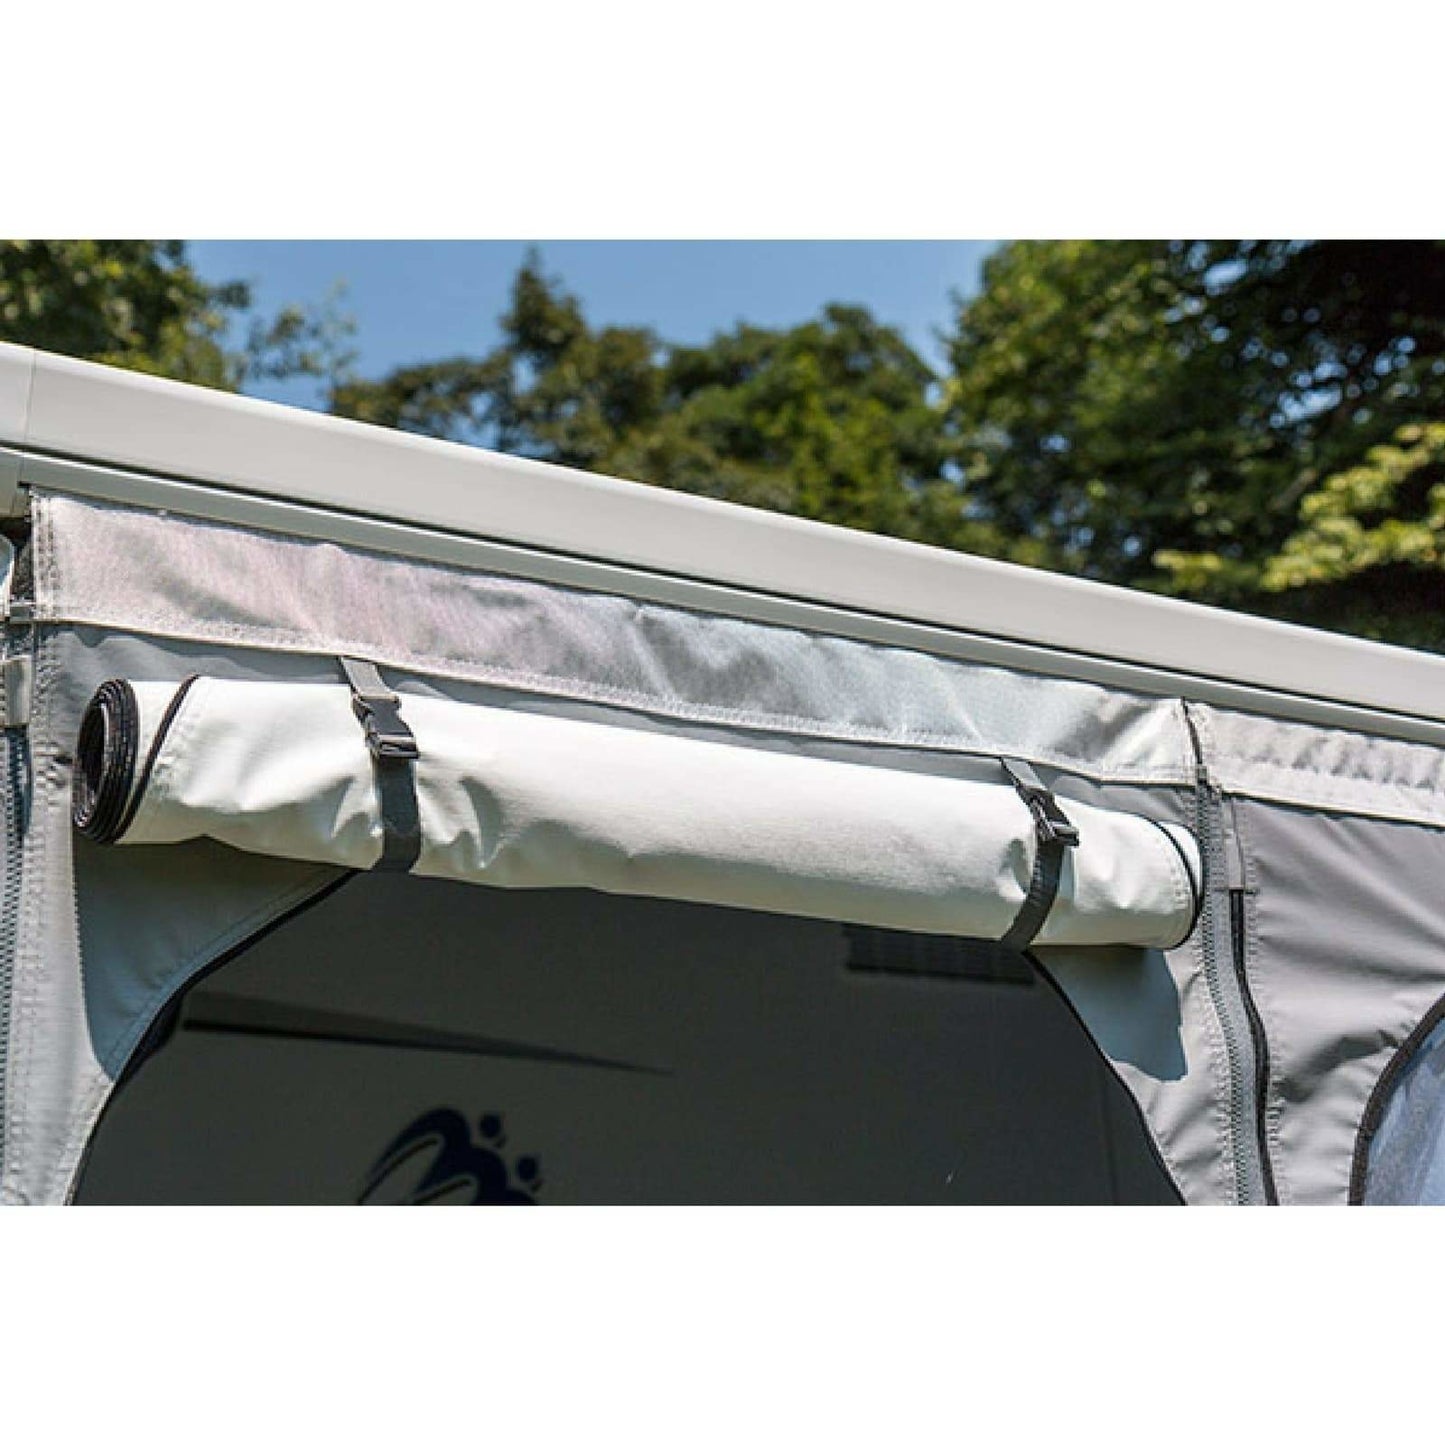 Fiamma F65 Privacy Room made by Fiamma. A Tent sold by Quality Caravan Awnings